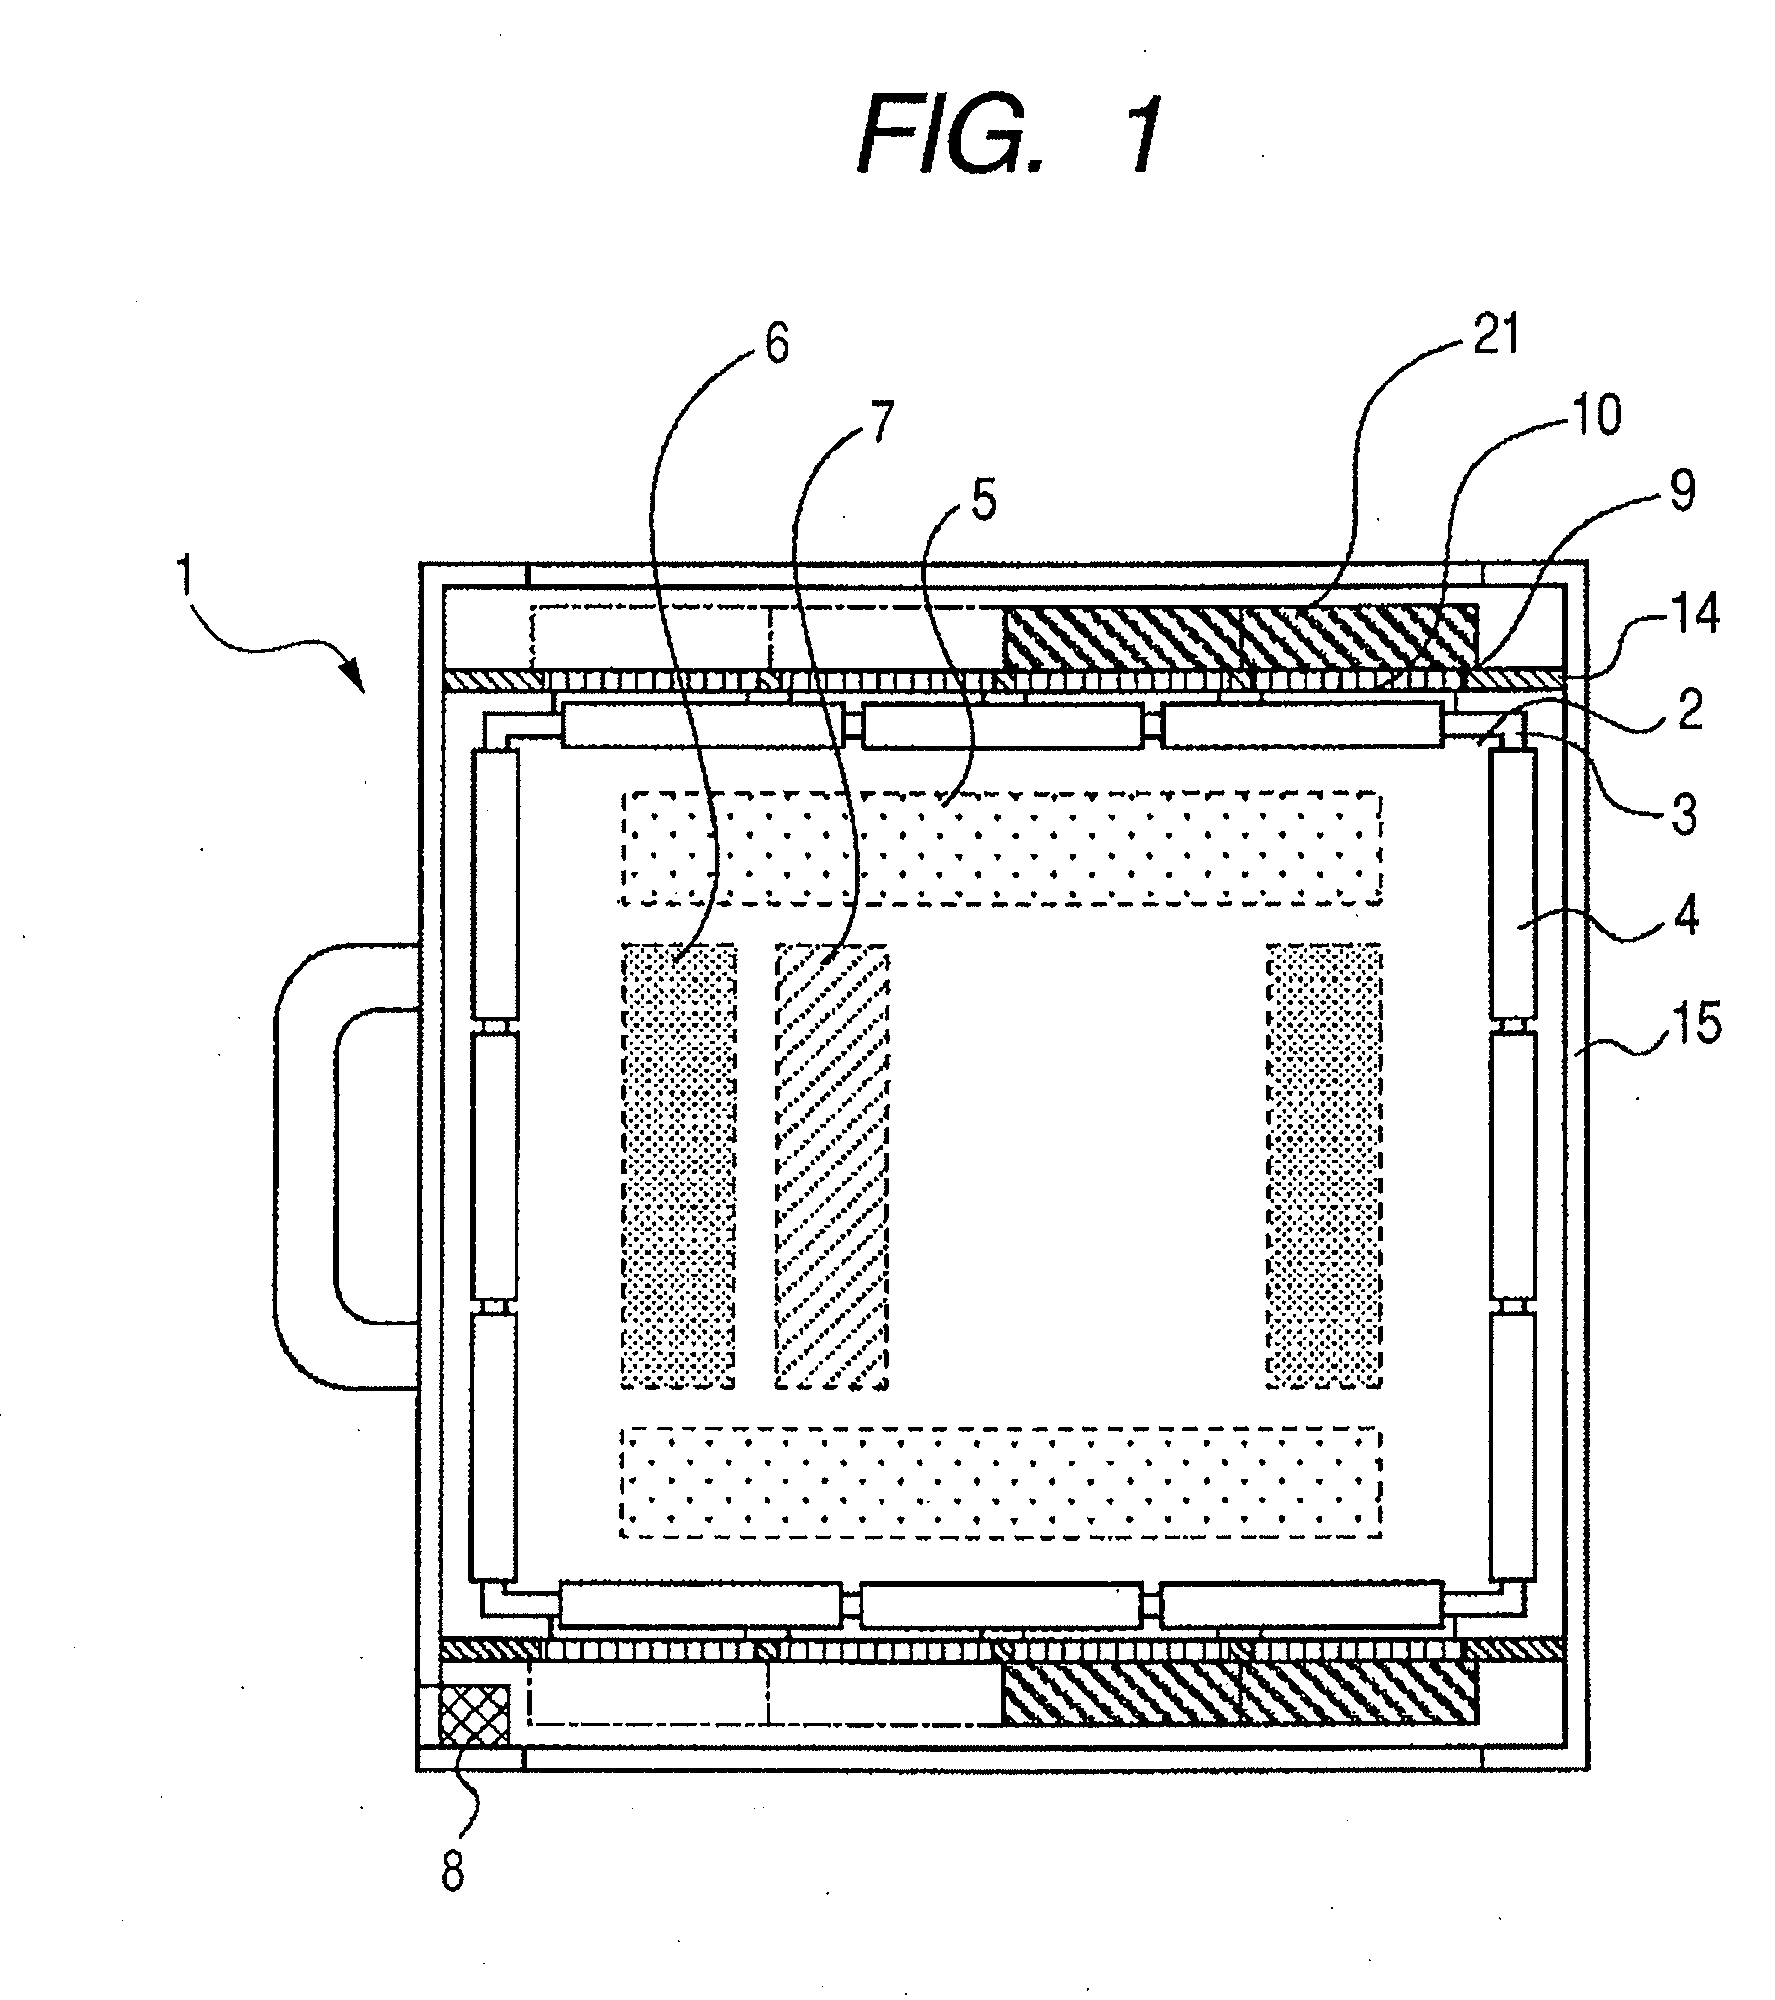 Electronic cassette type of radiation detection apparatus